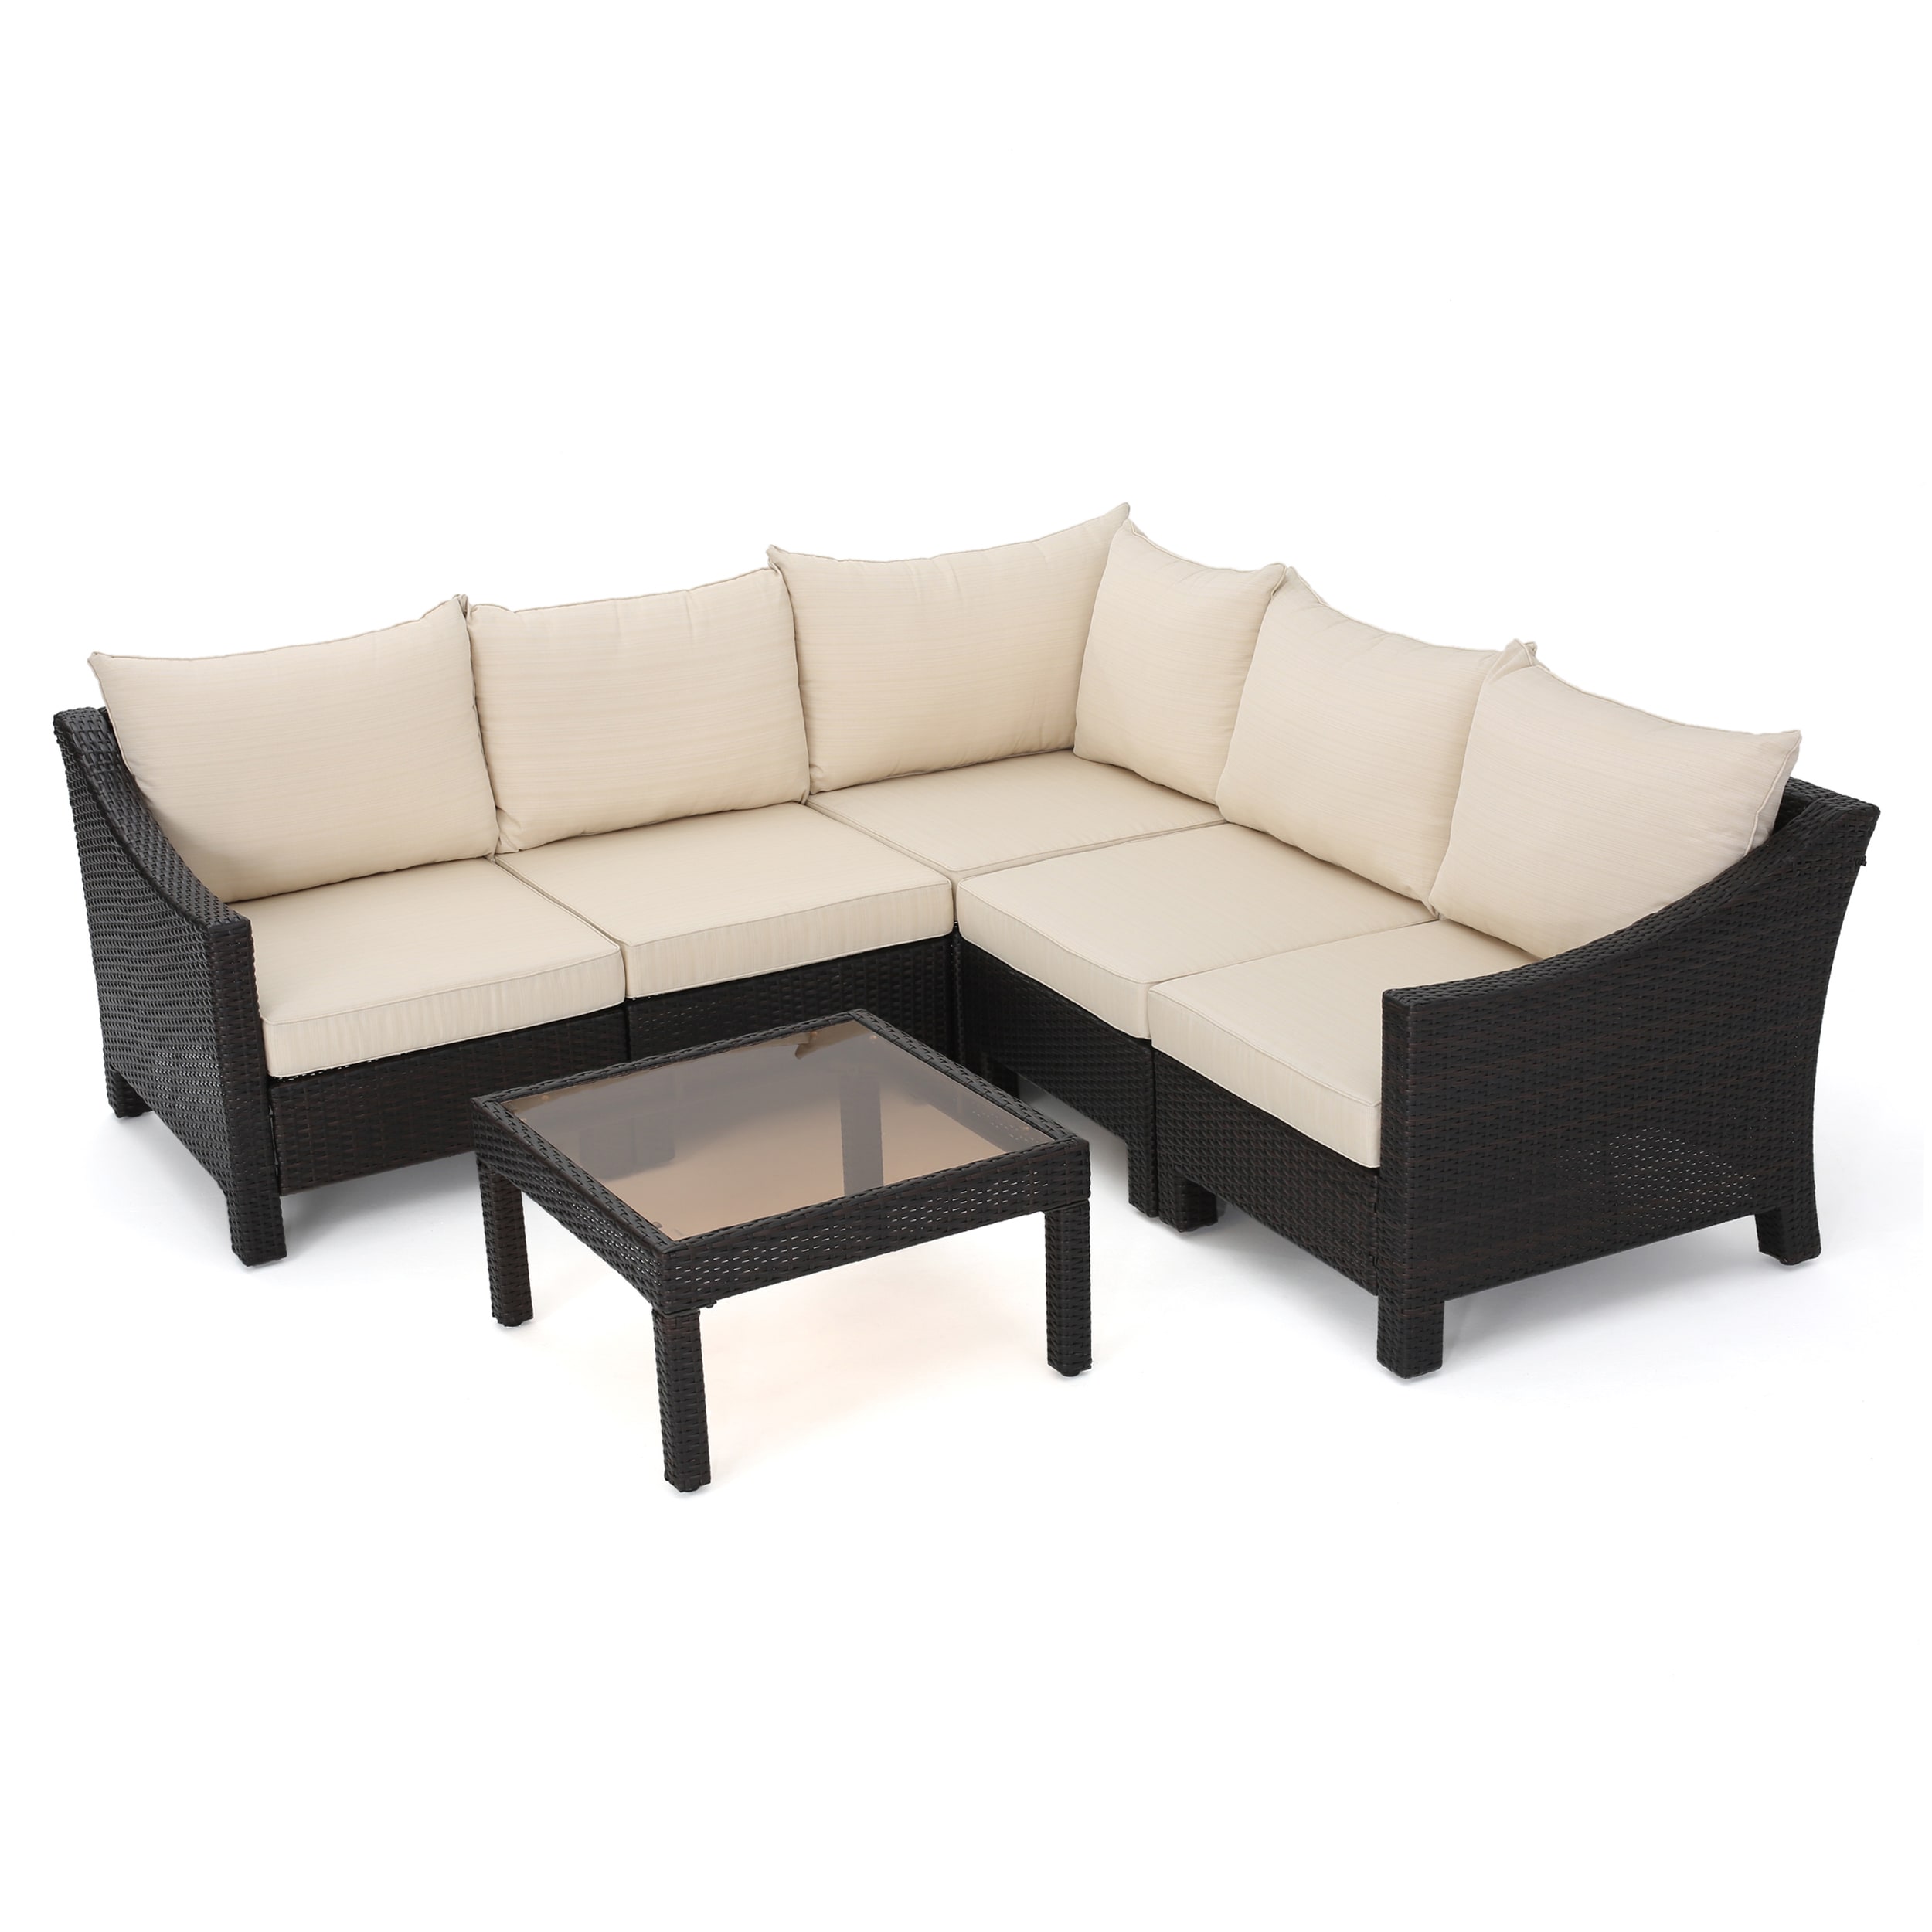 Antibes Outdoor 6piece V Shaped Sectional Sofa Set with